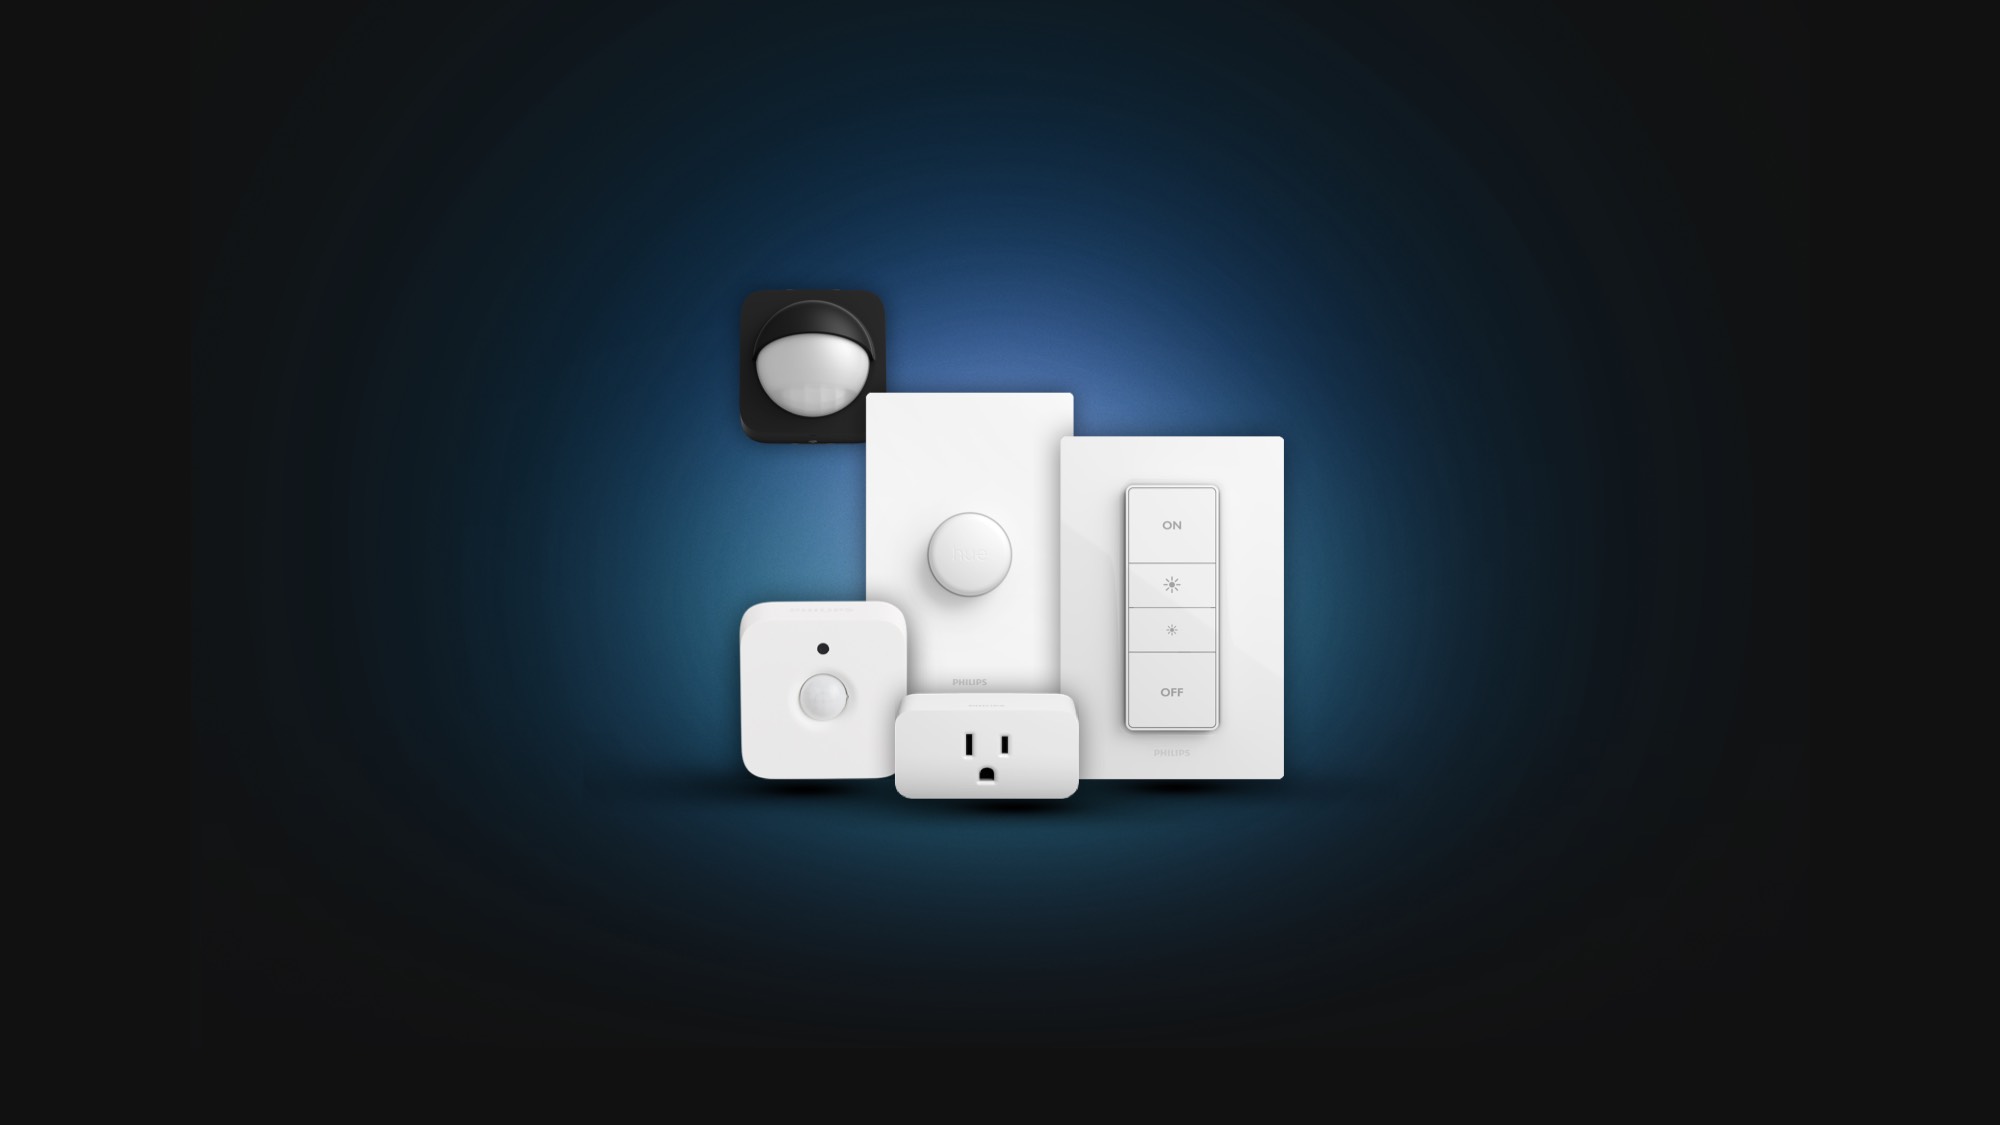 Accessories  Philips Hue SG